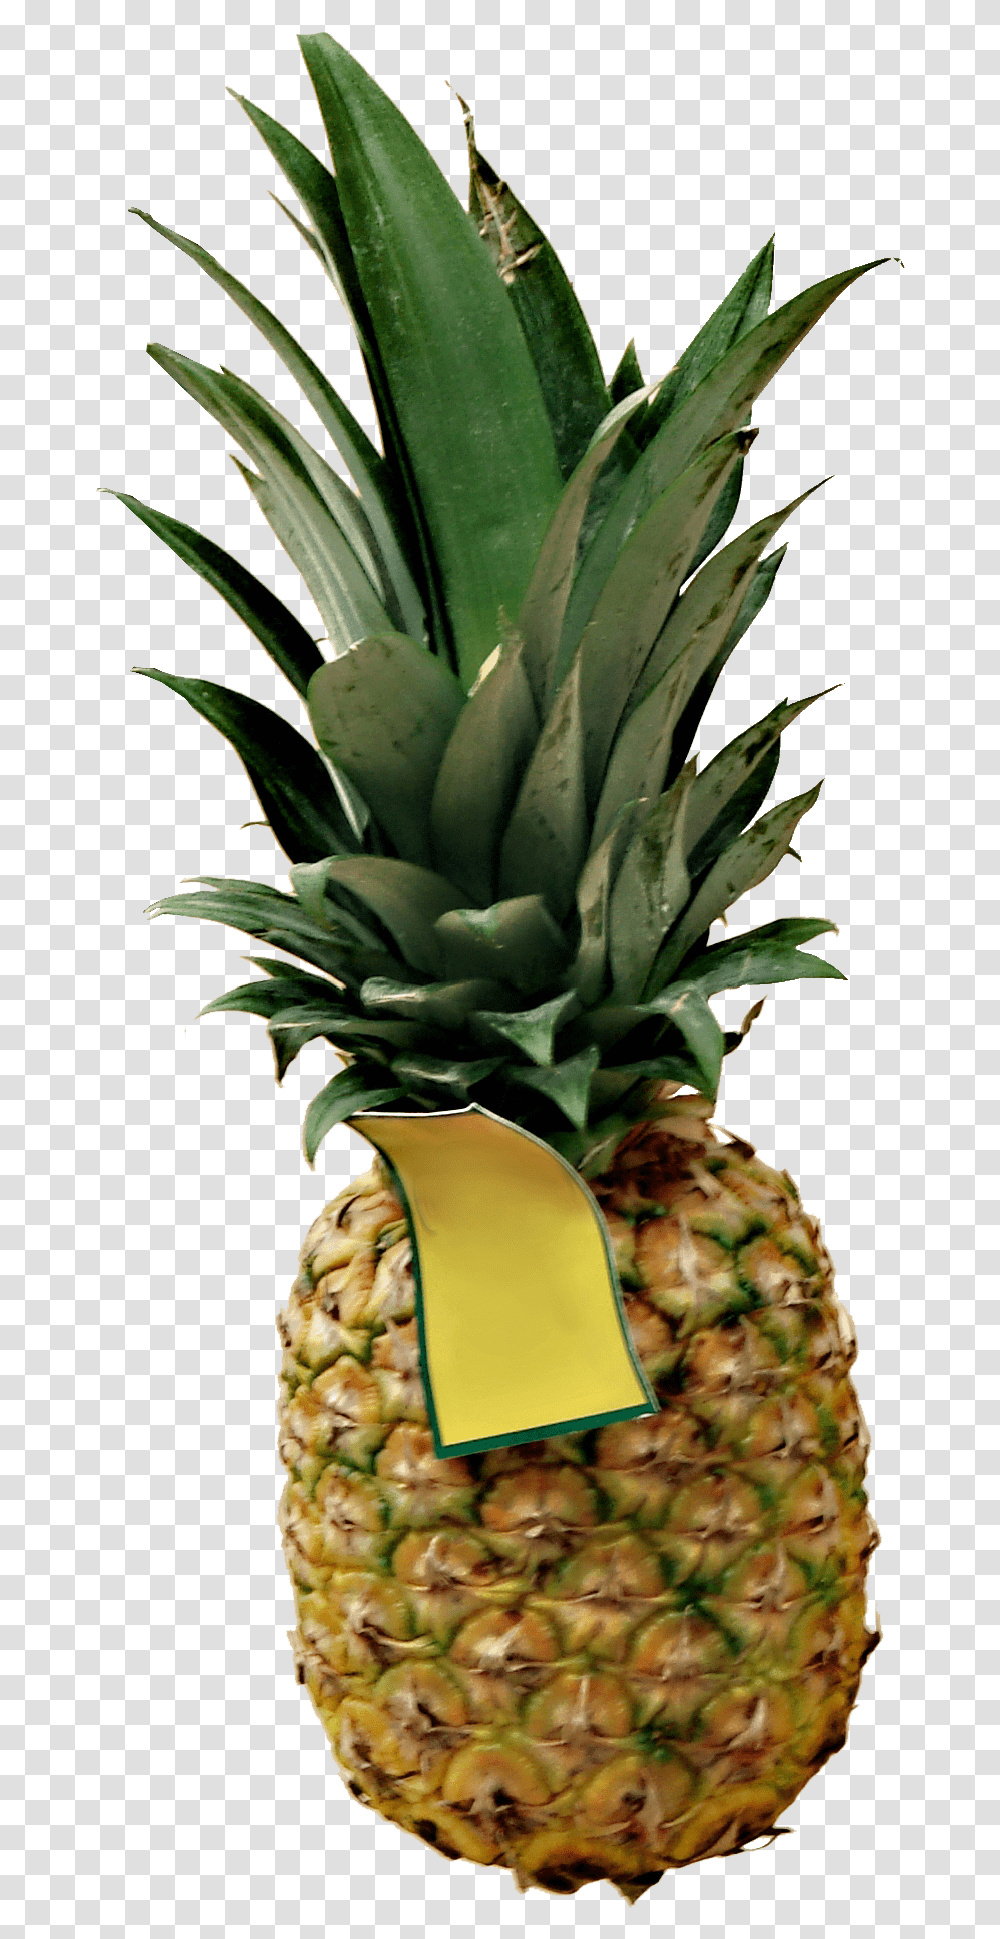 Download Hd High Definition Pineapple Picture Ananas, Fruit, Plant, Food Transparent Png